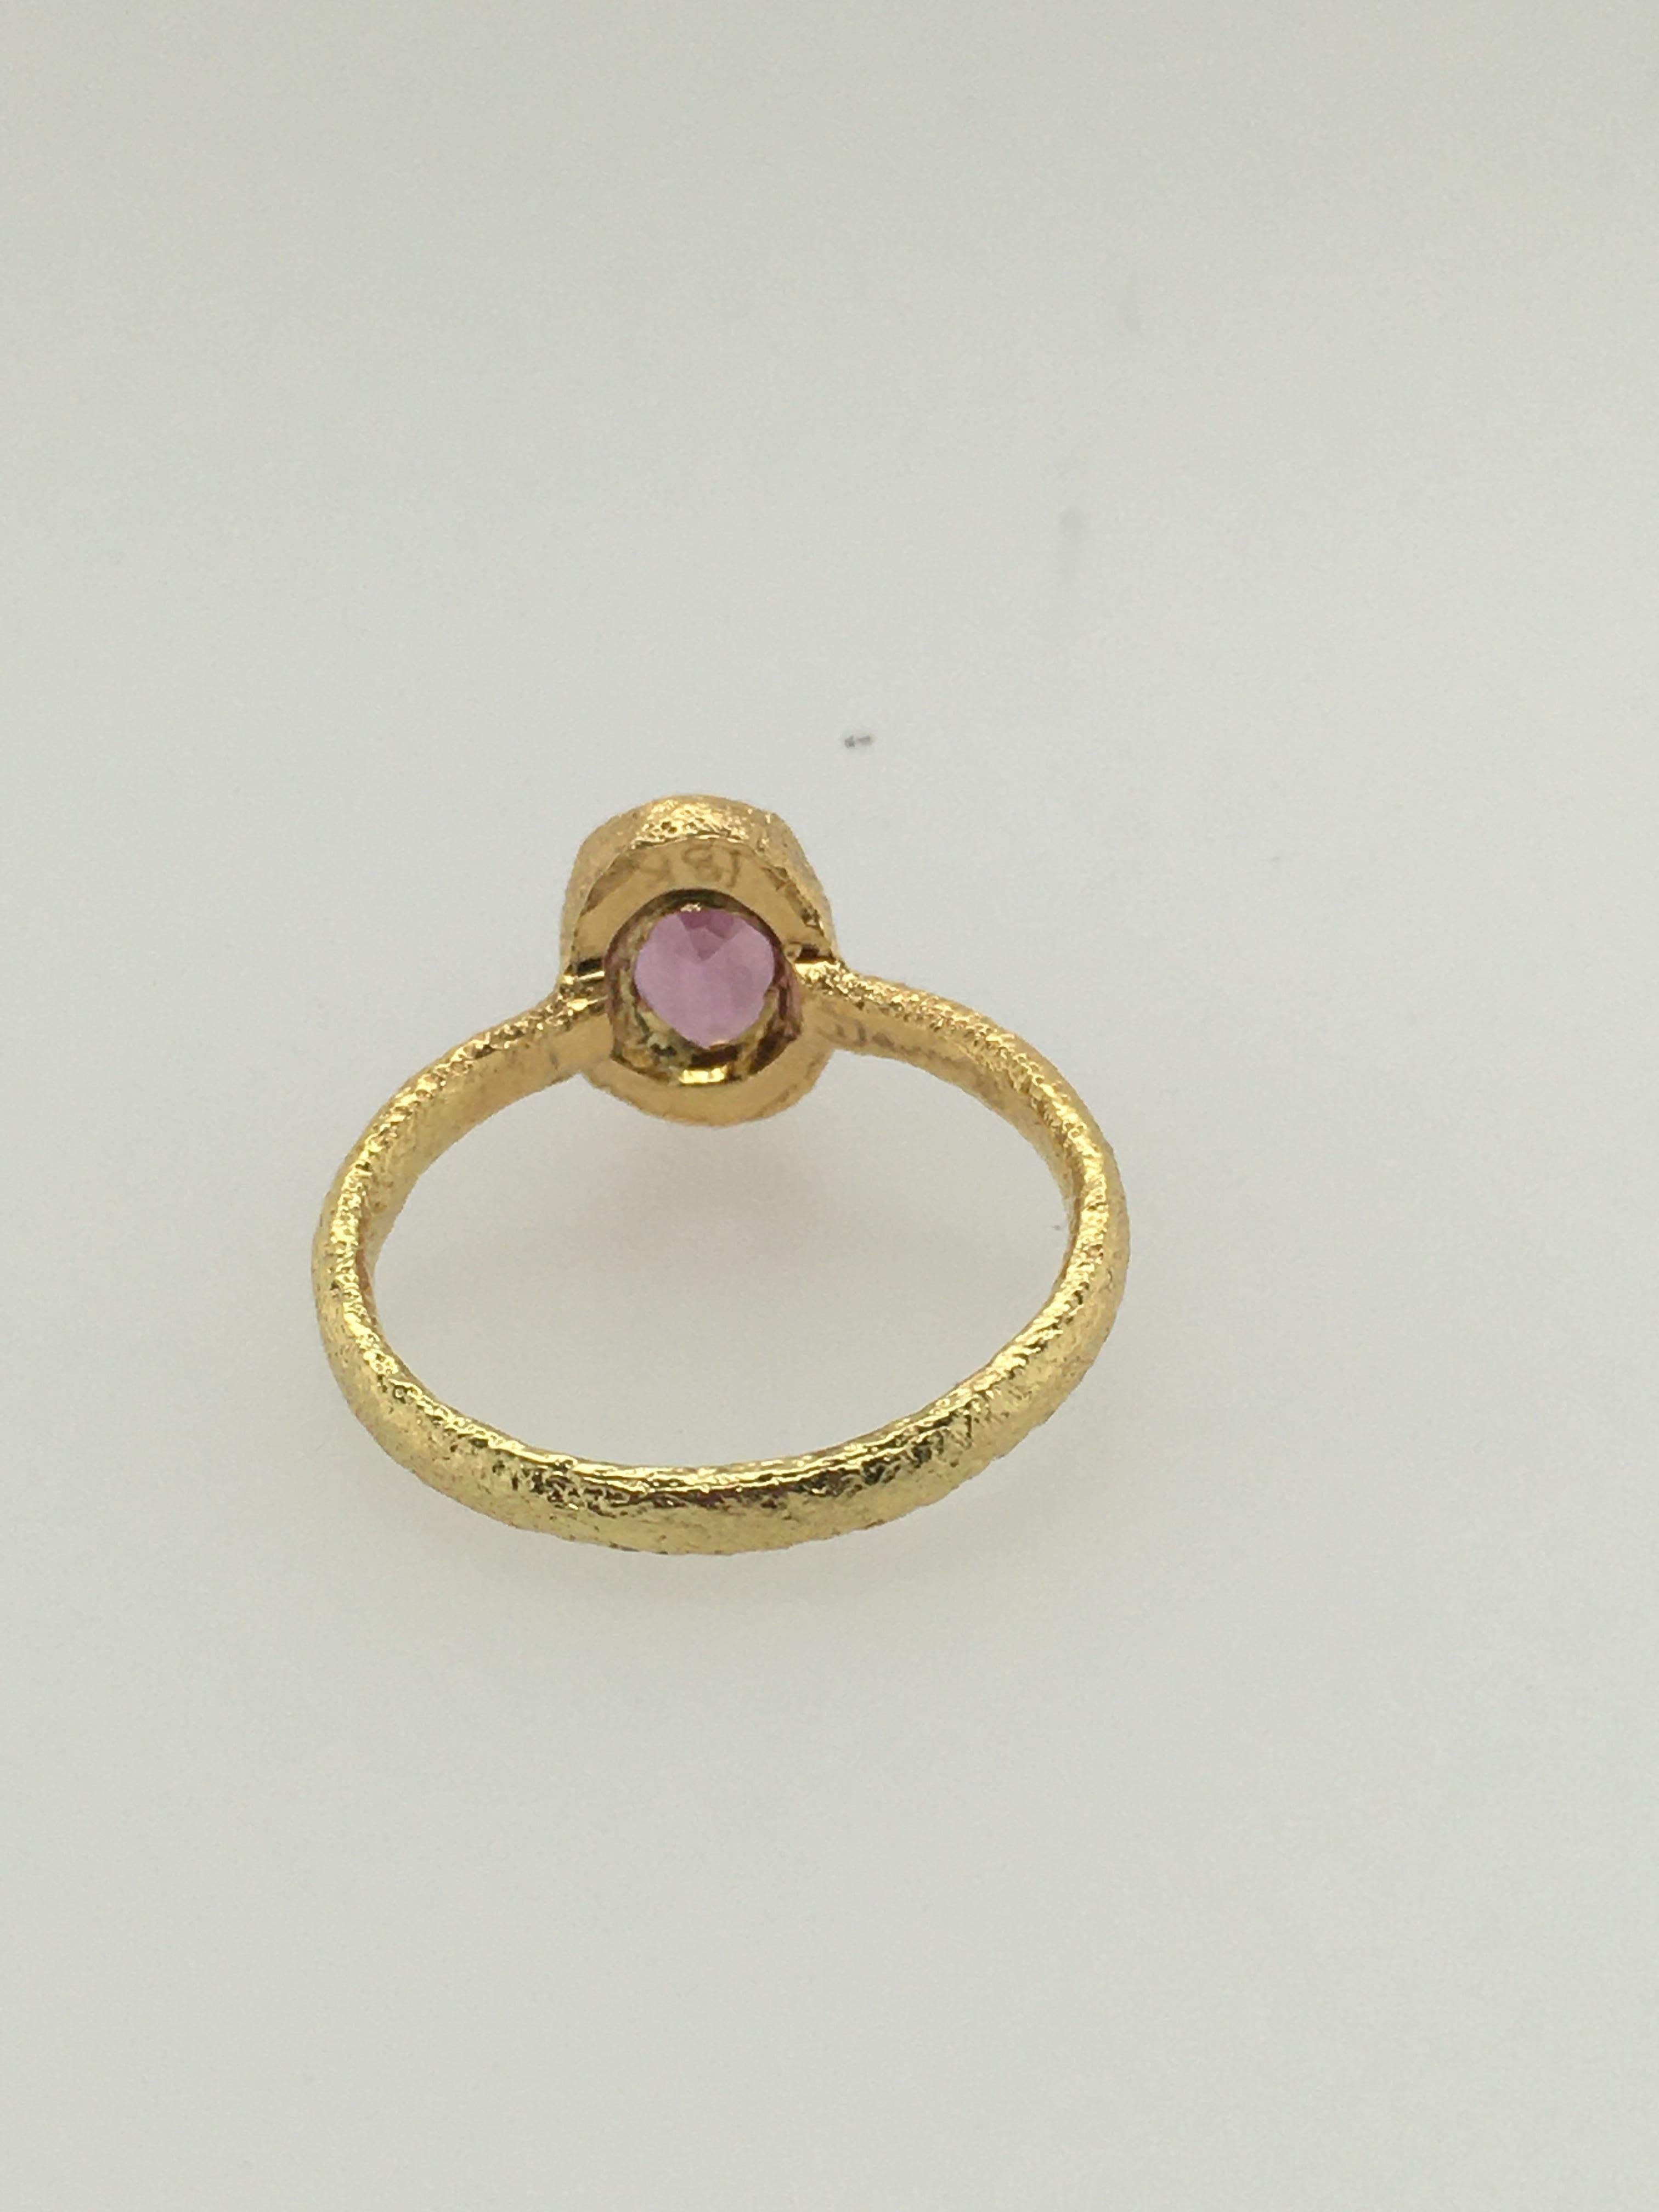 Distinctive, hammered 18K Yellow Gold Ring with oval Rose Pink Rhodolite Garnet.  Designed & created by well-known Maine jeweler Patricia Daunis, in her Portland studio.  Part of her custom 18K Yellow Gold ATUIK collection, this ring stacks